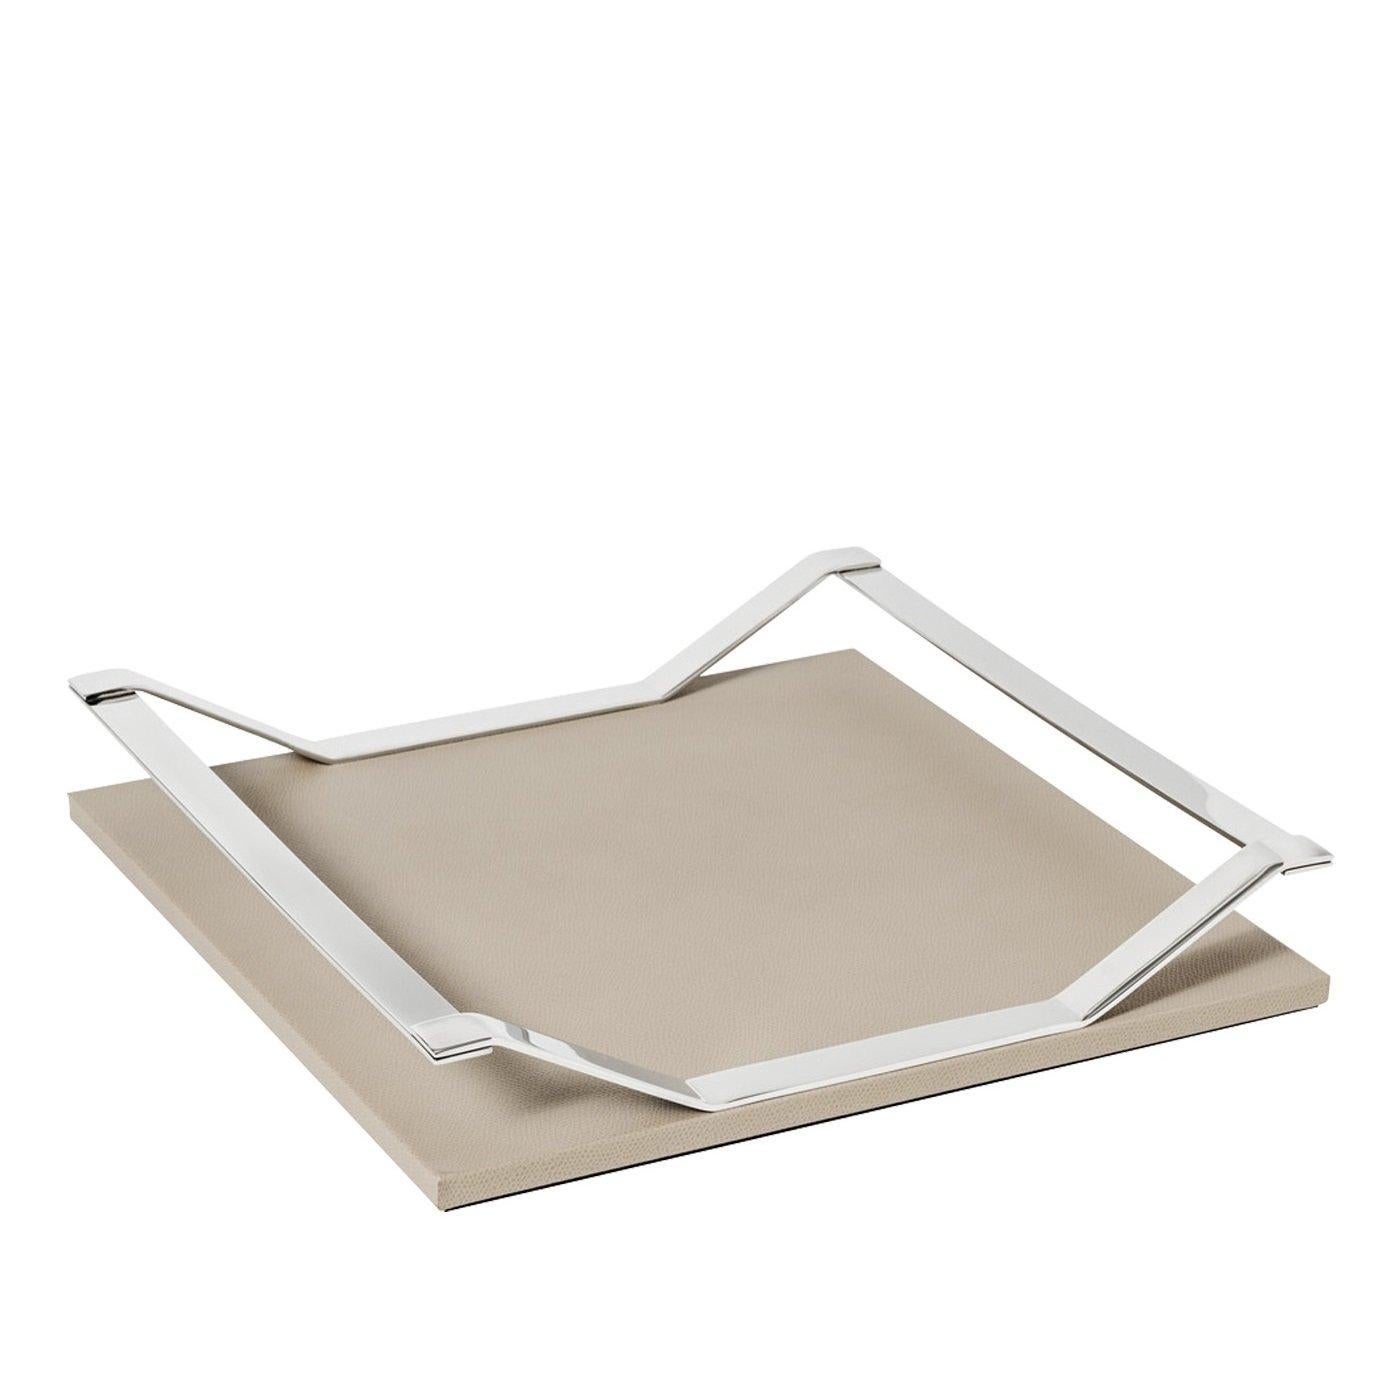 Part of the Wing collection of trays, this elegant piece has a square structure in wood that was upholstered in leather with a beige color and a non-slip material on its bottom. The metal handles have a chrome finish and are shaped as a pair of